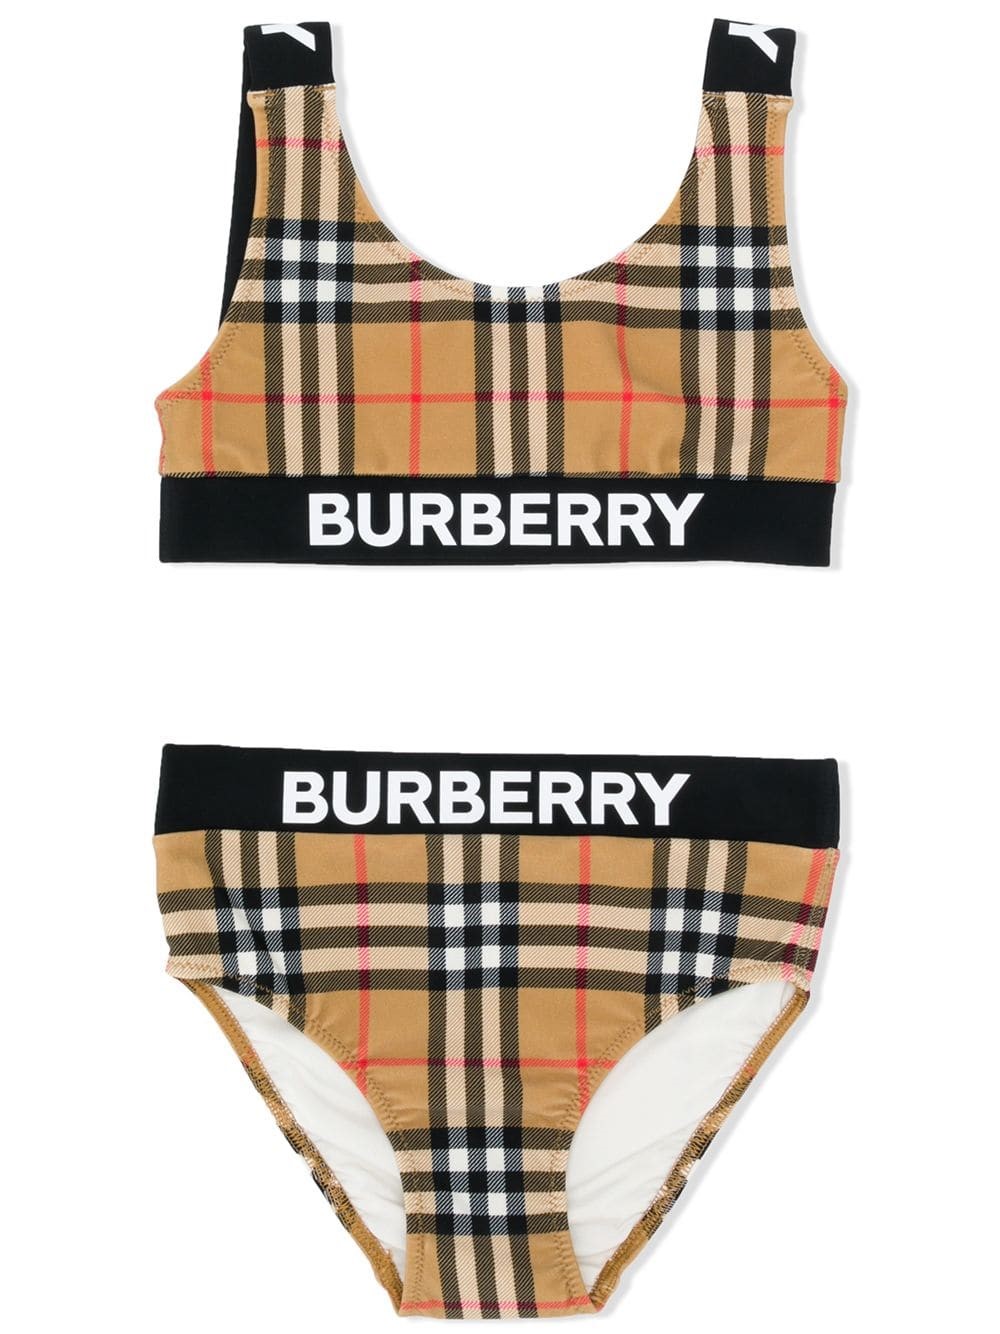 burberry toddler swimsuit